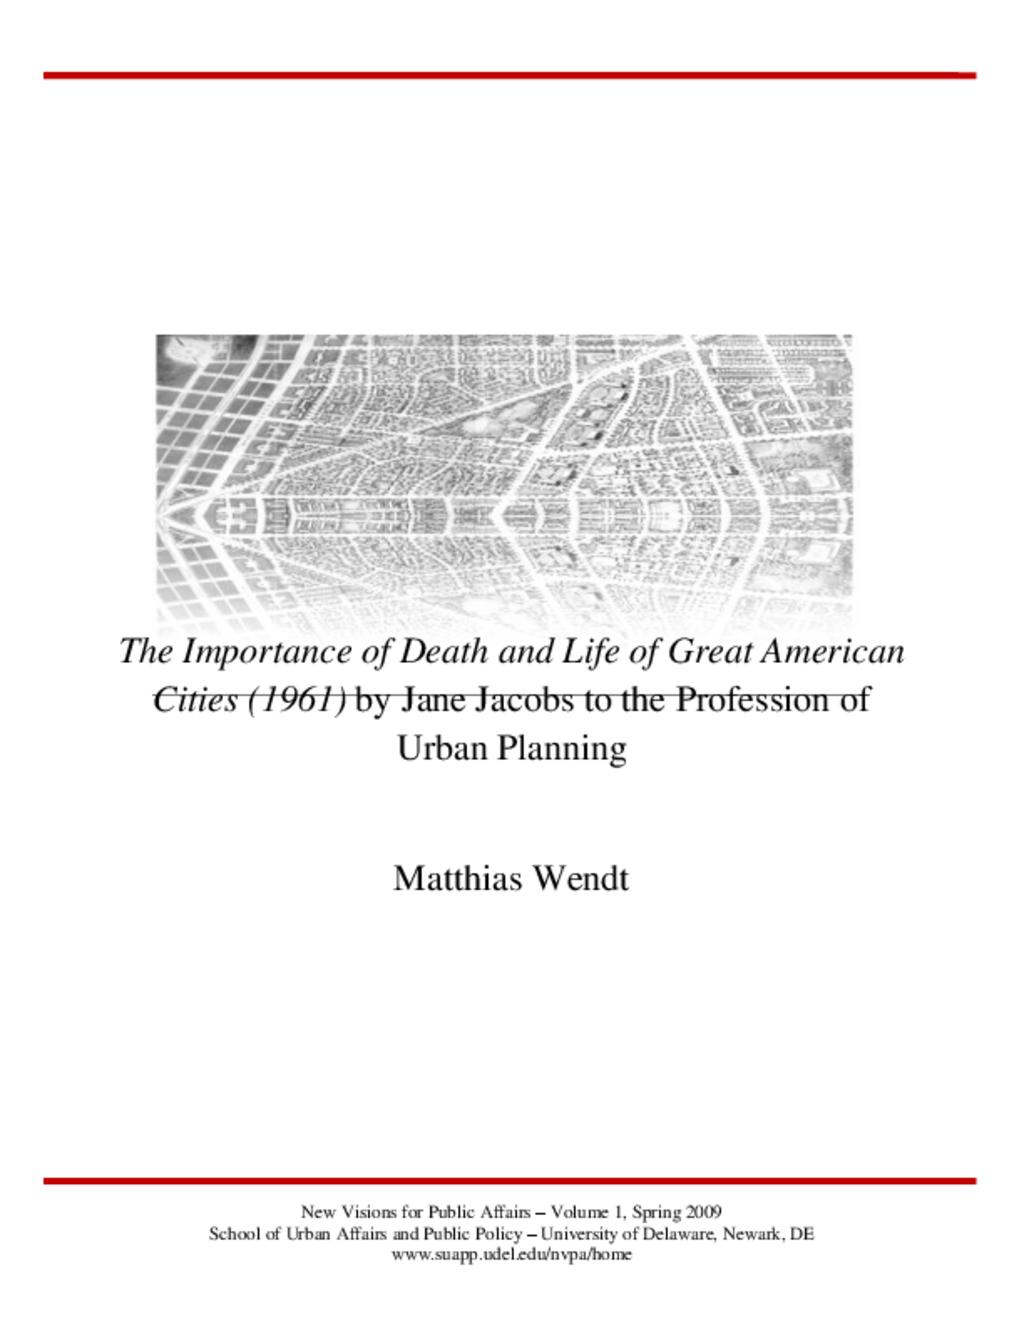 The Importance of Death and Life of Great American Cities